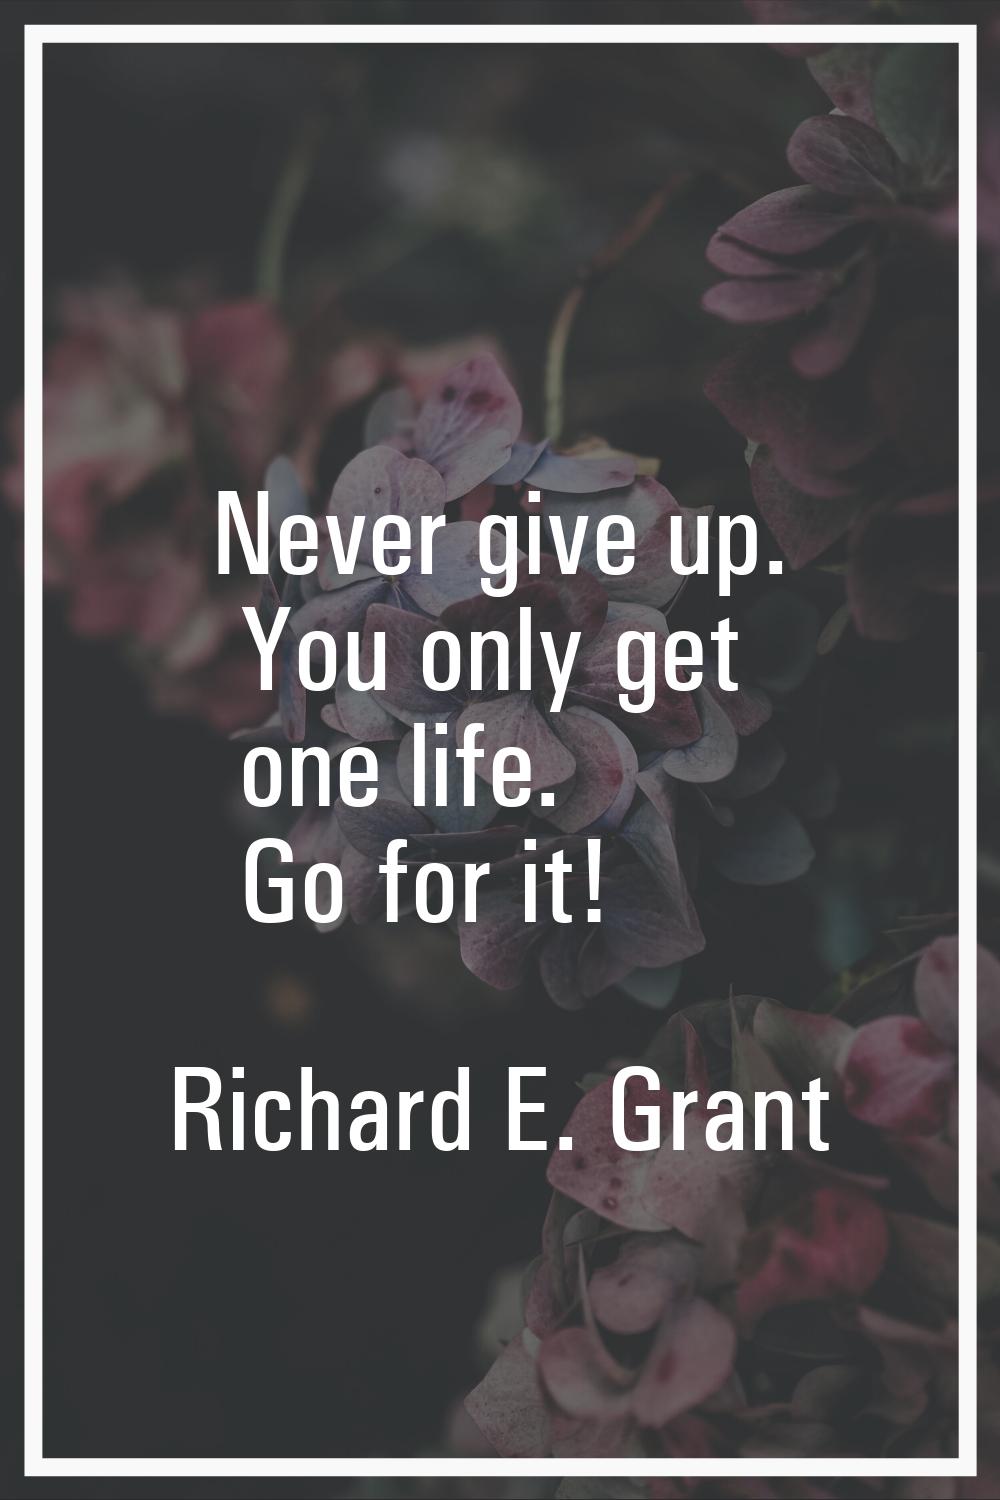 Never give up. You only get one life. Go for it!